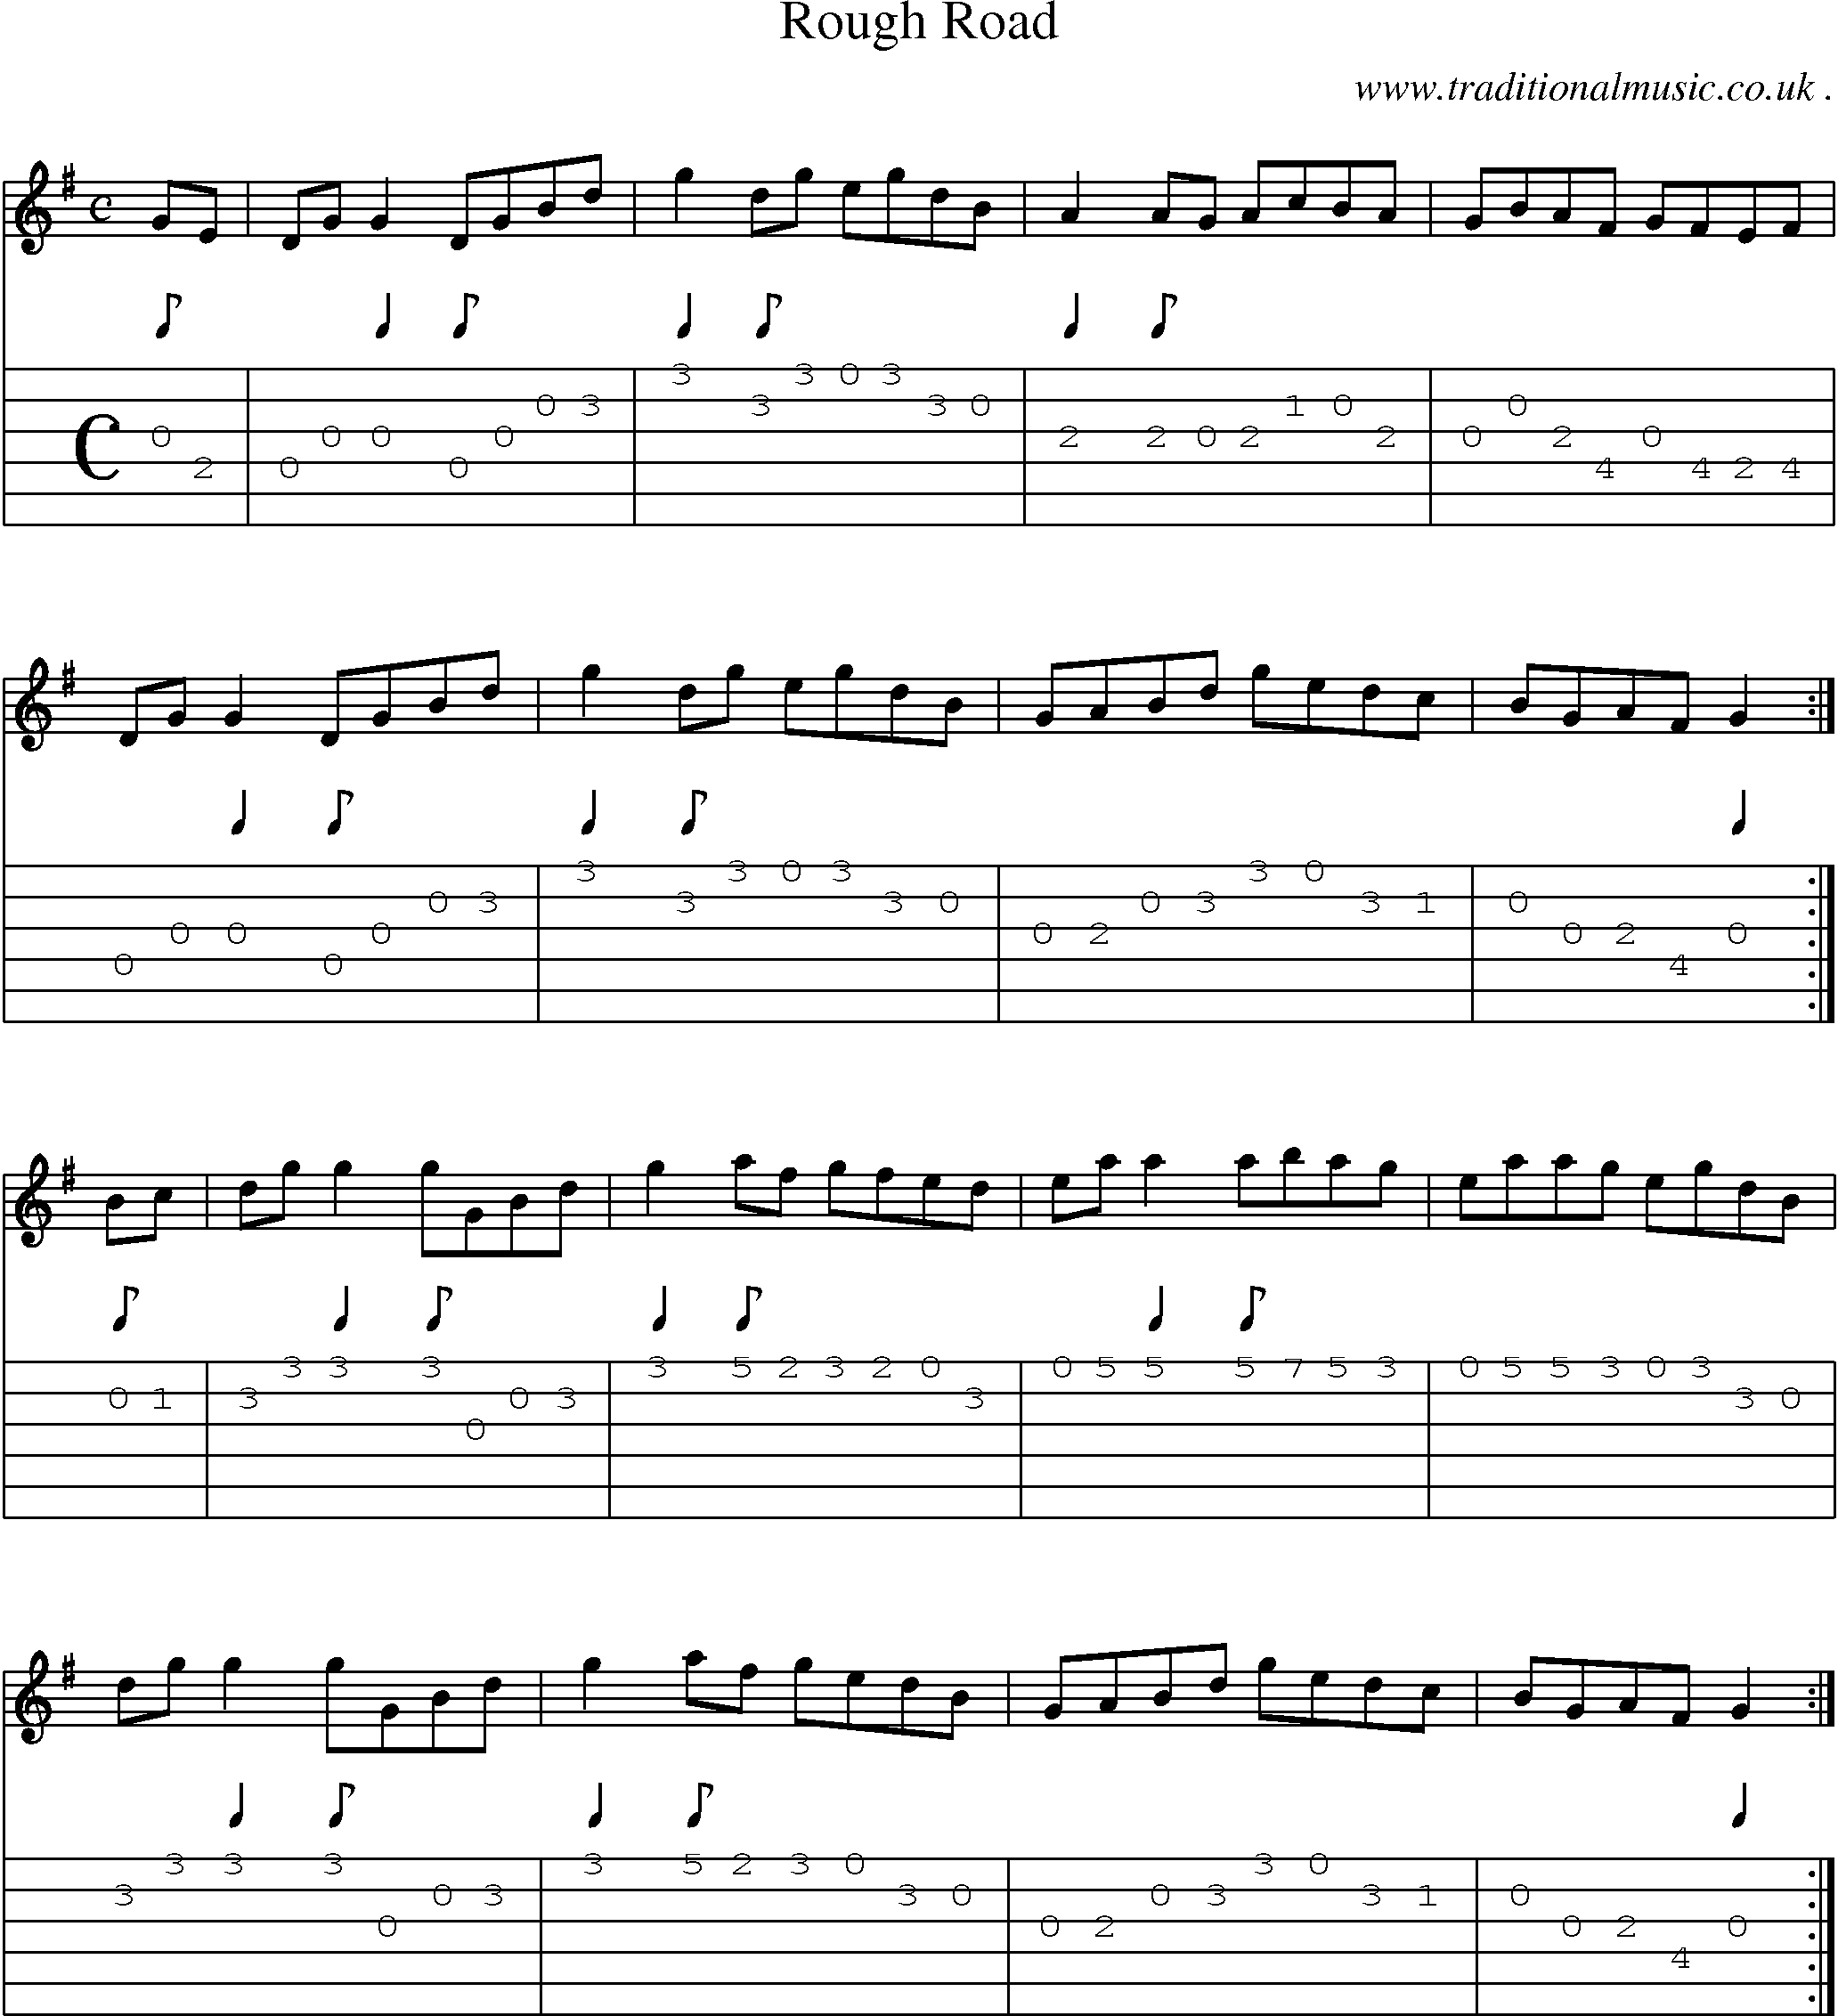 Sheet-Music and Guitar Tabs for Rough Road